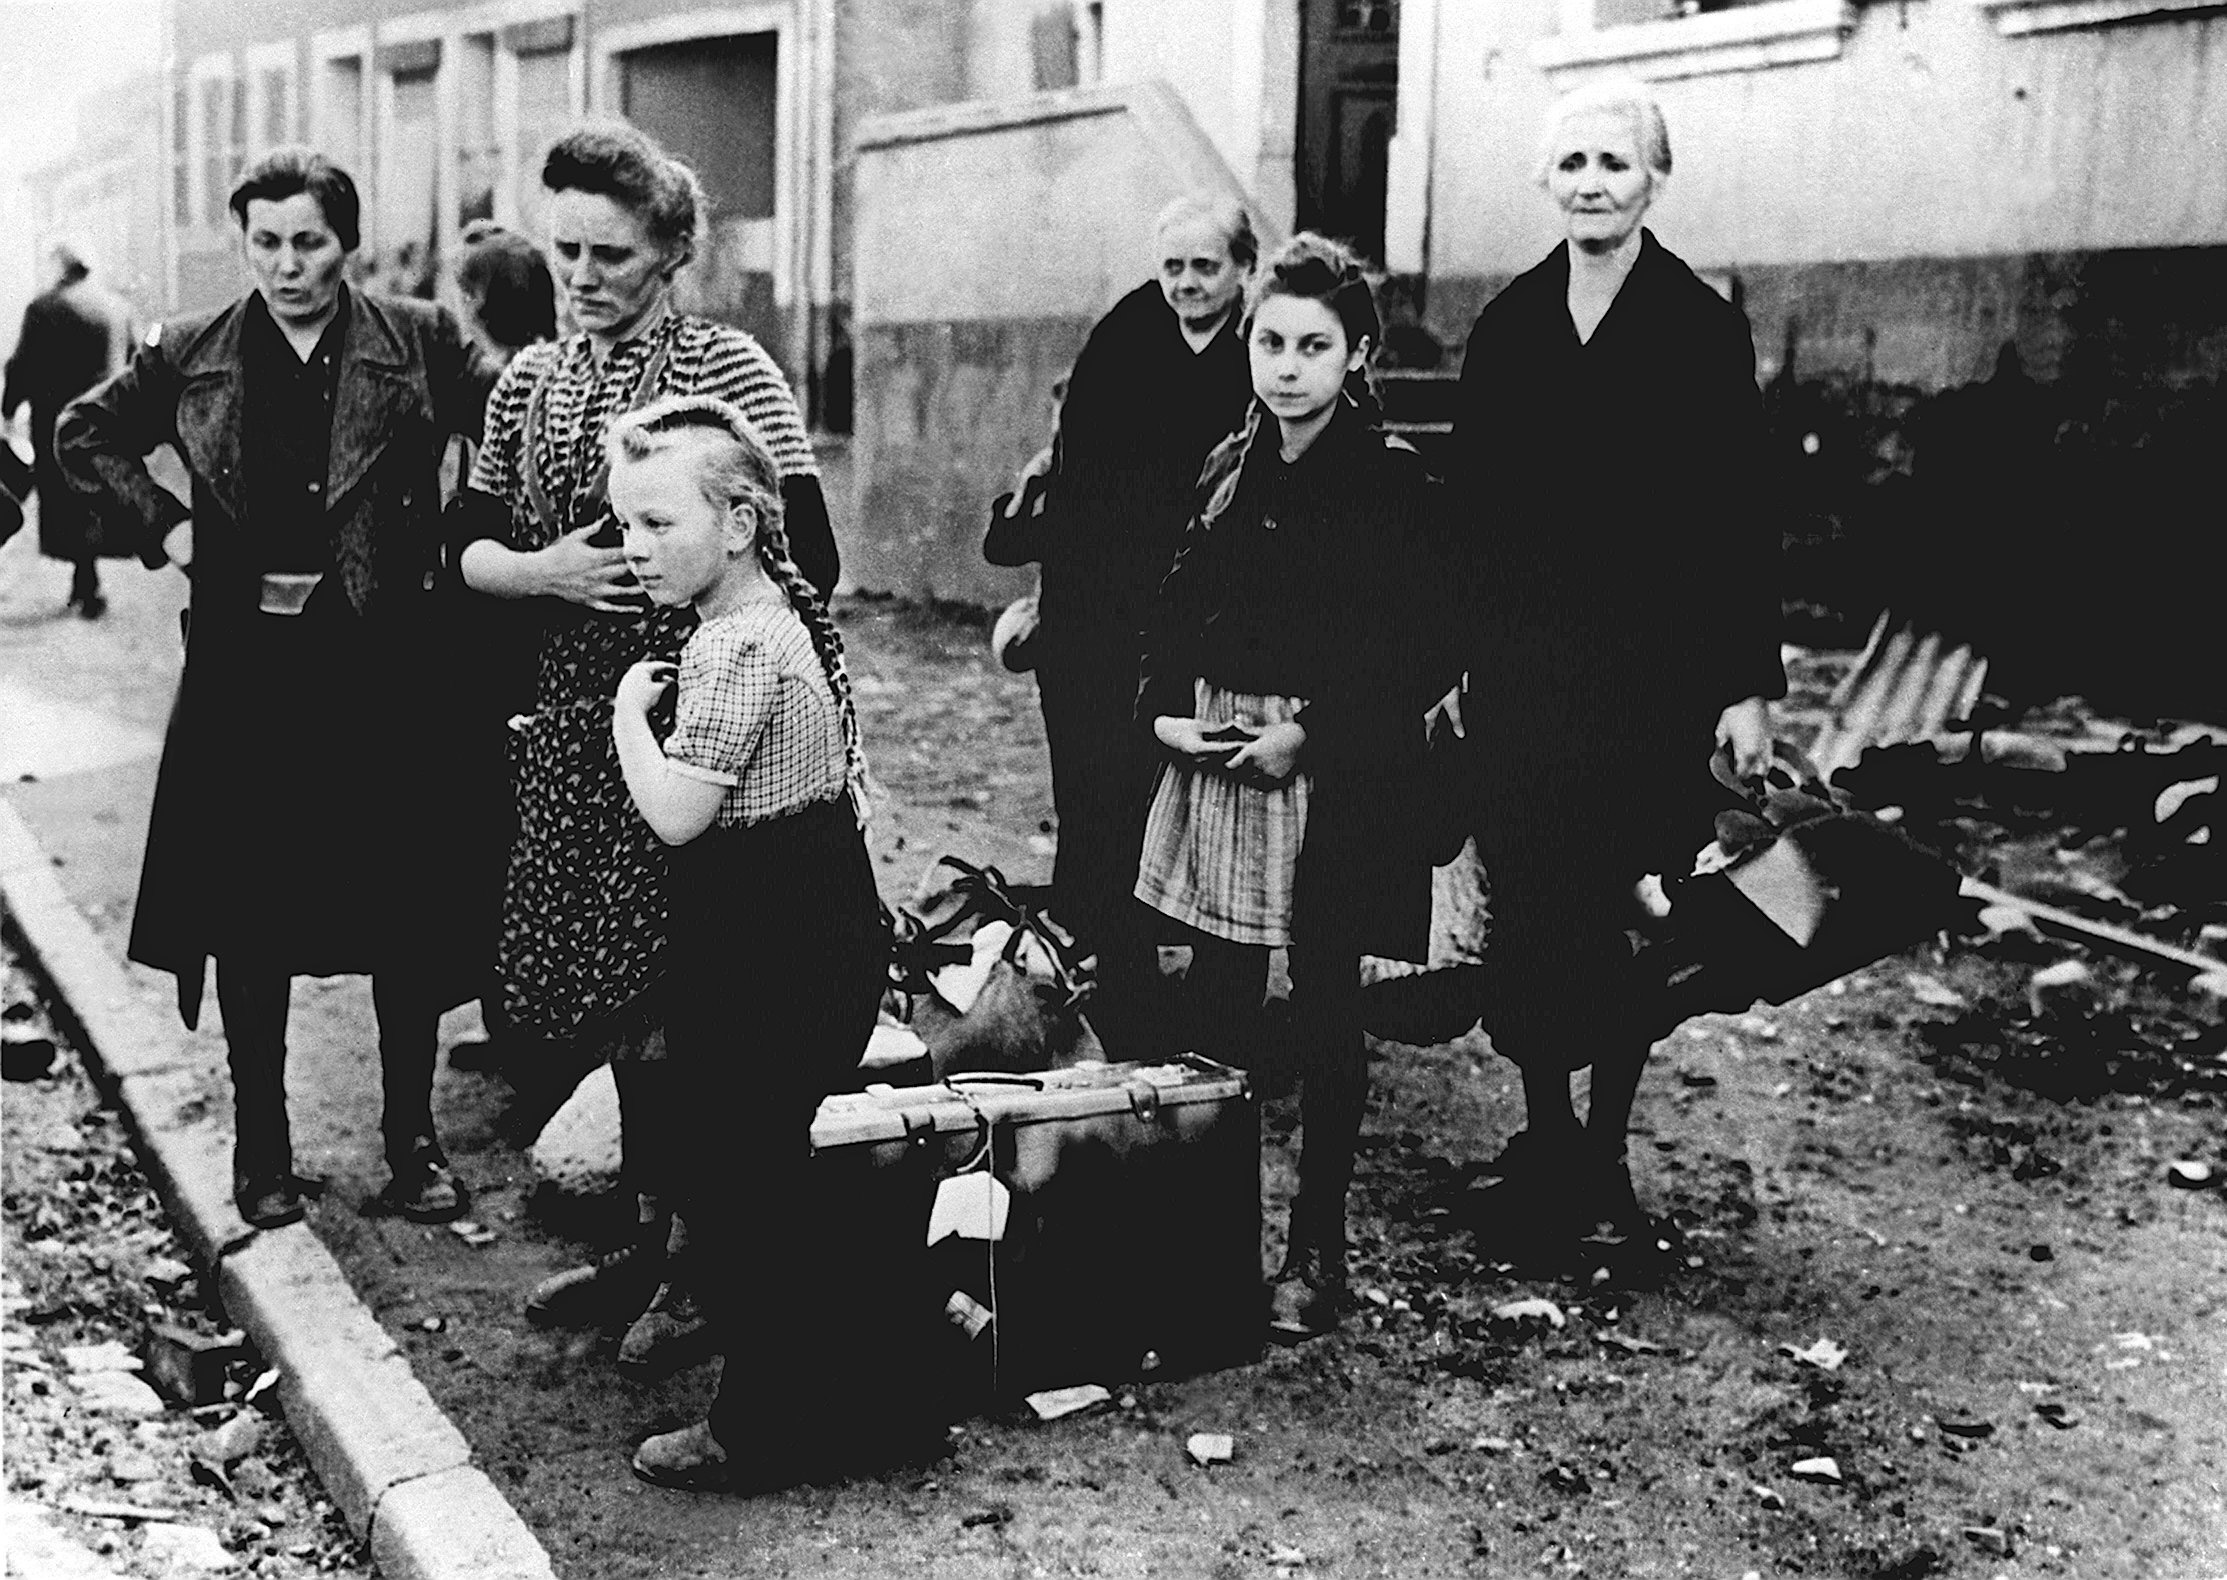 Women and children are standing at the roadside and are waiting for a transport possibility, in 1945.